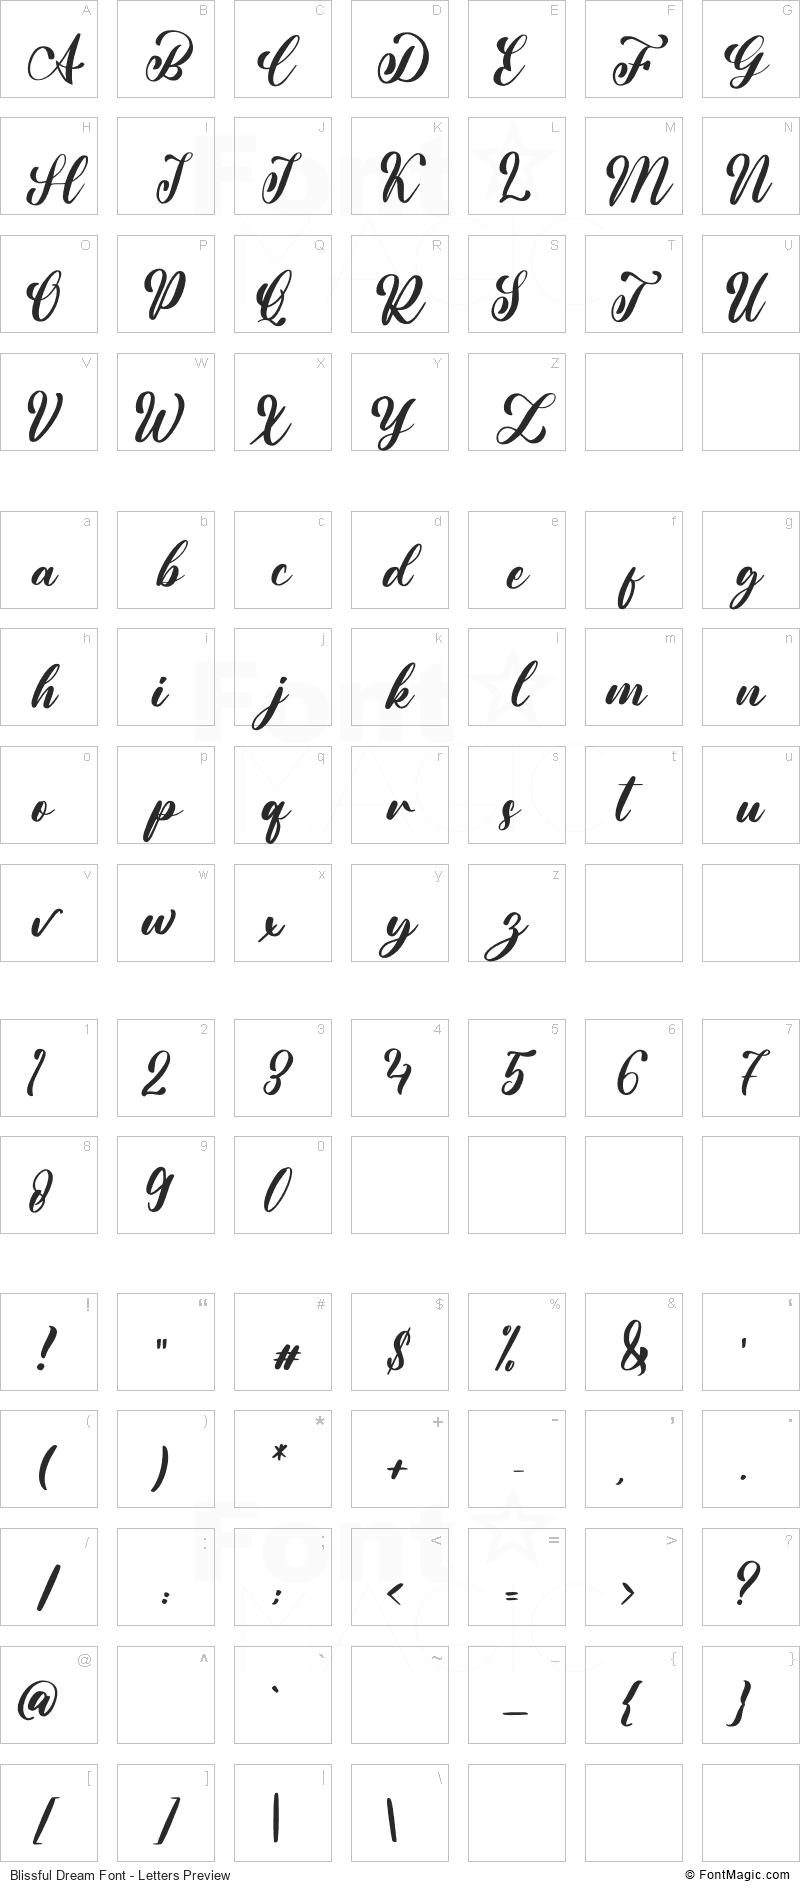 Blissful Dream Font - All Latters Preview Chart